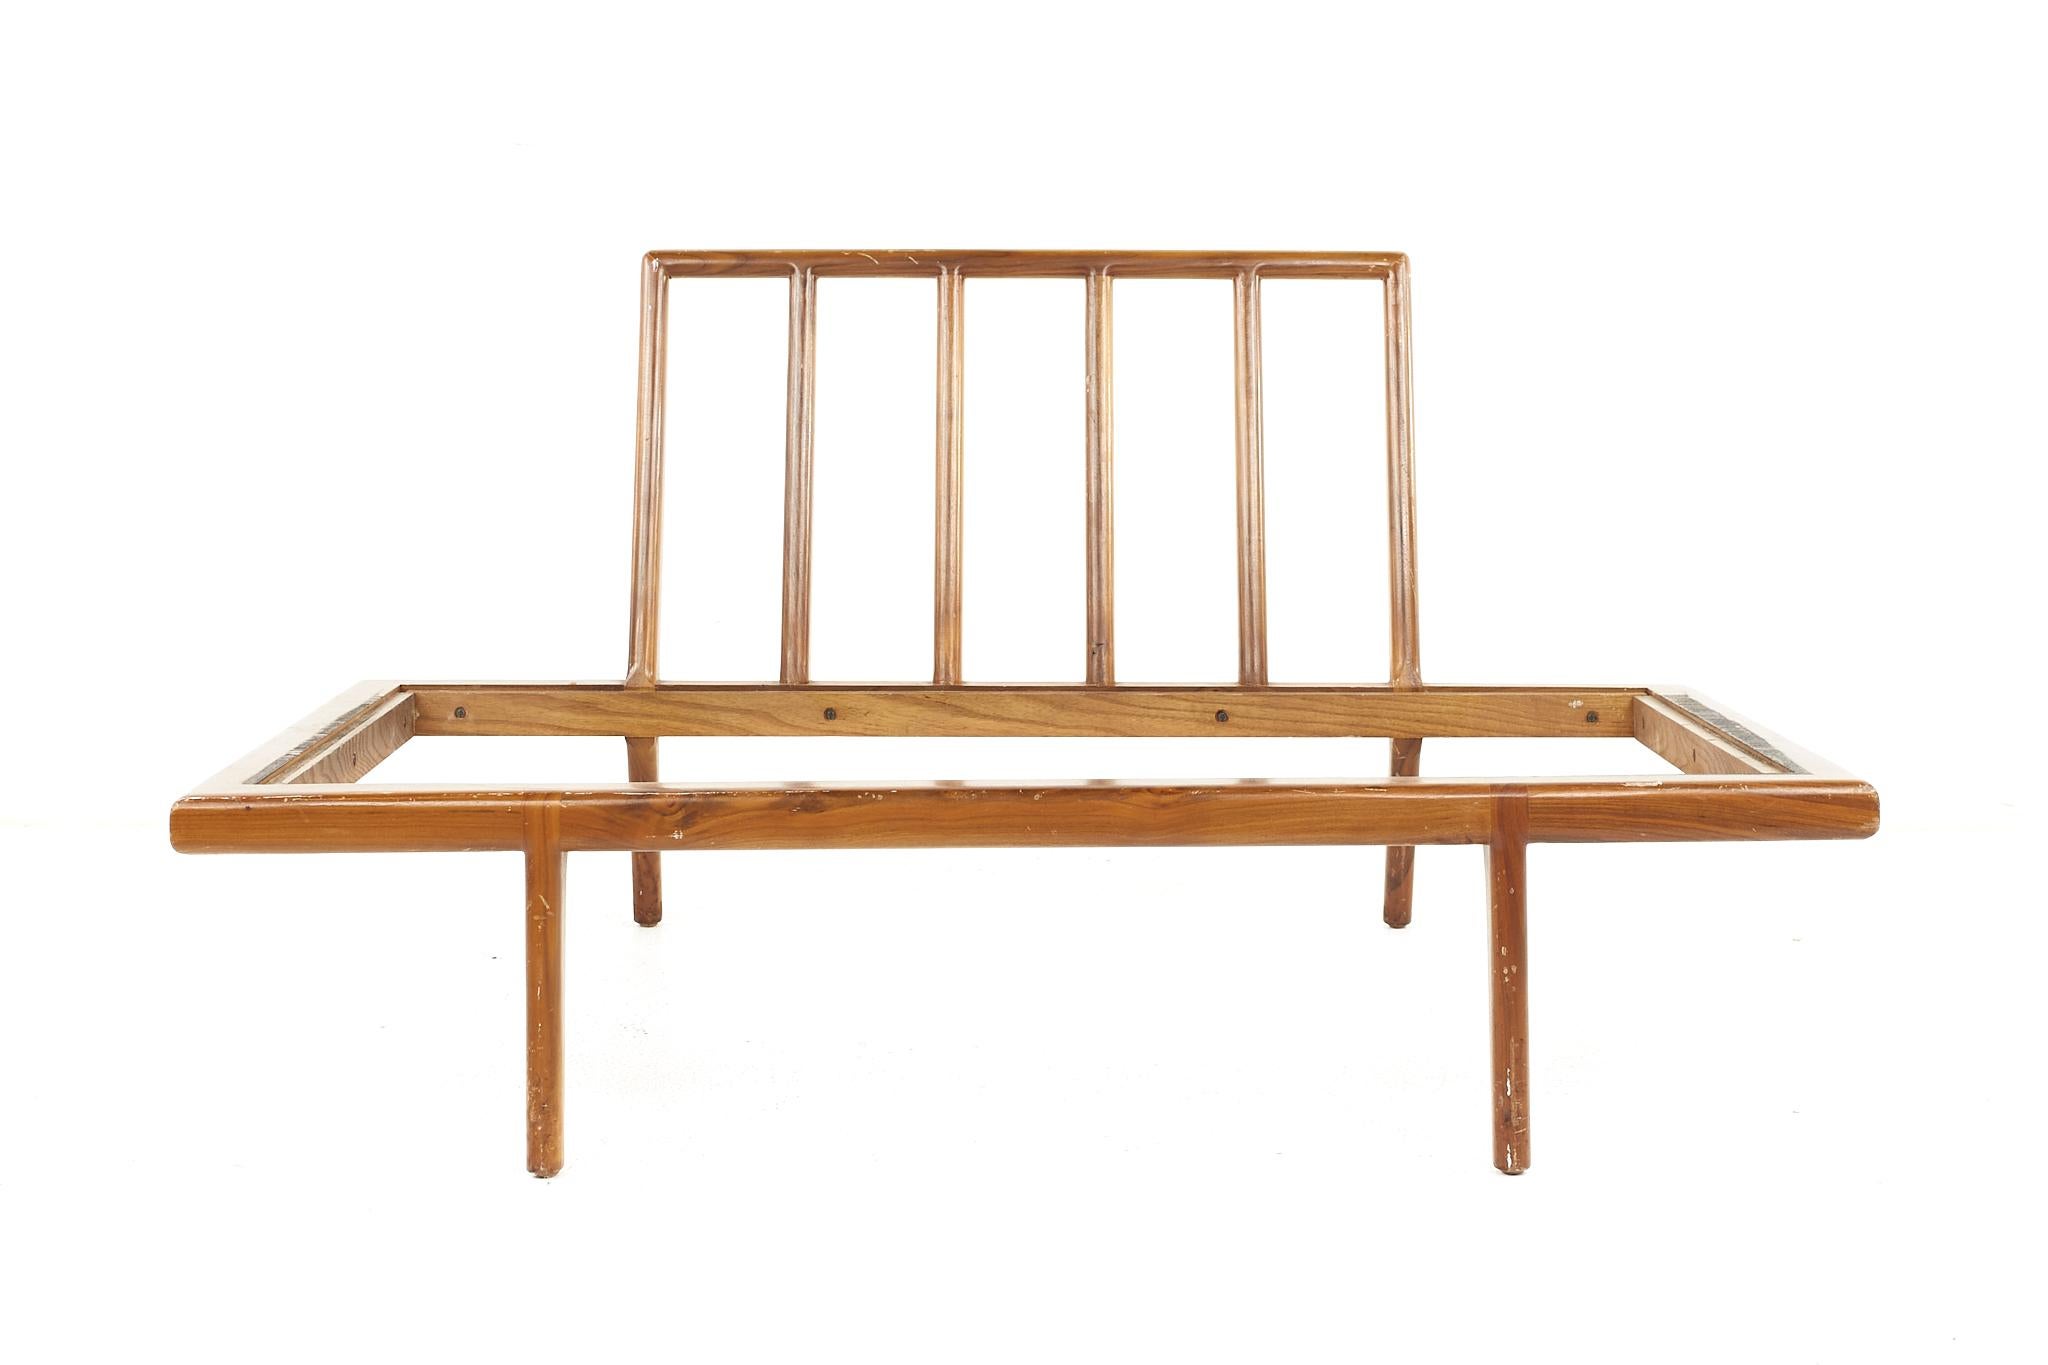 Mel Smilow mid-century wide walnut lounge chair daybed.

The lounge chair measures: 49 wide x 27.5 deep x 25 high, with a seat height of 11 inches.

All pieces of furniture can be had in what we call restored vintage condition. That means the